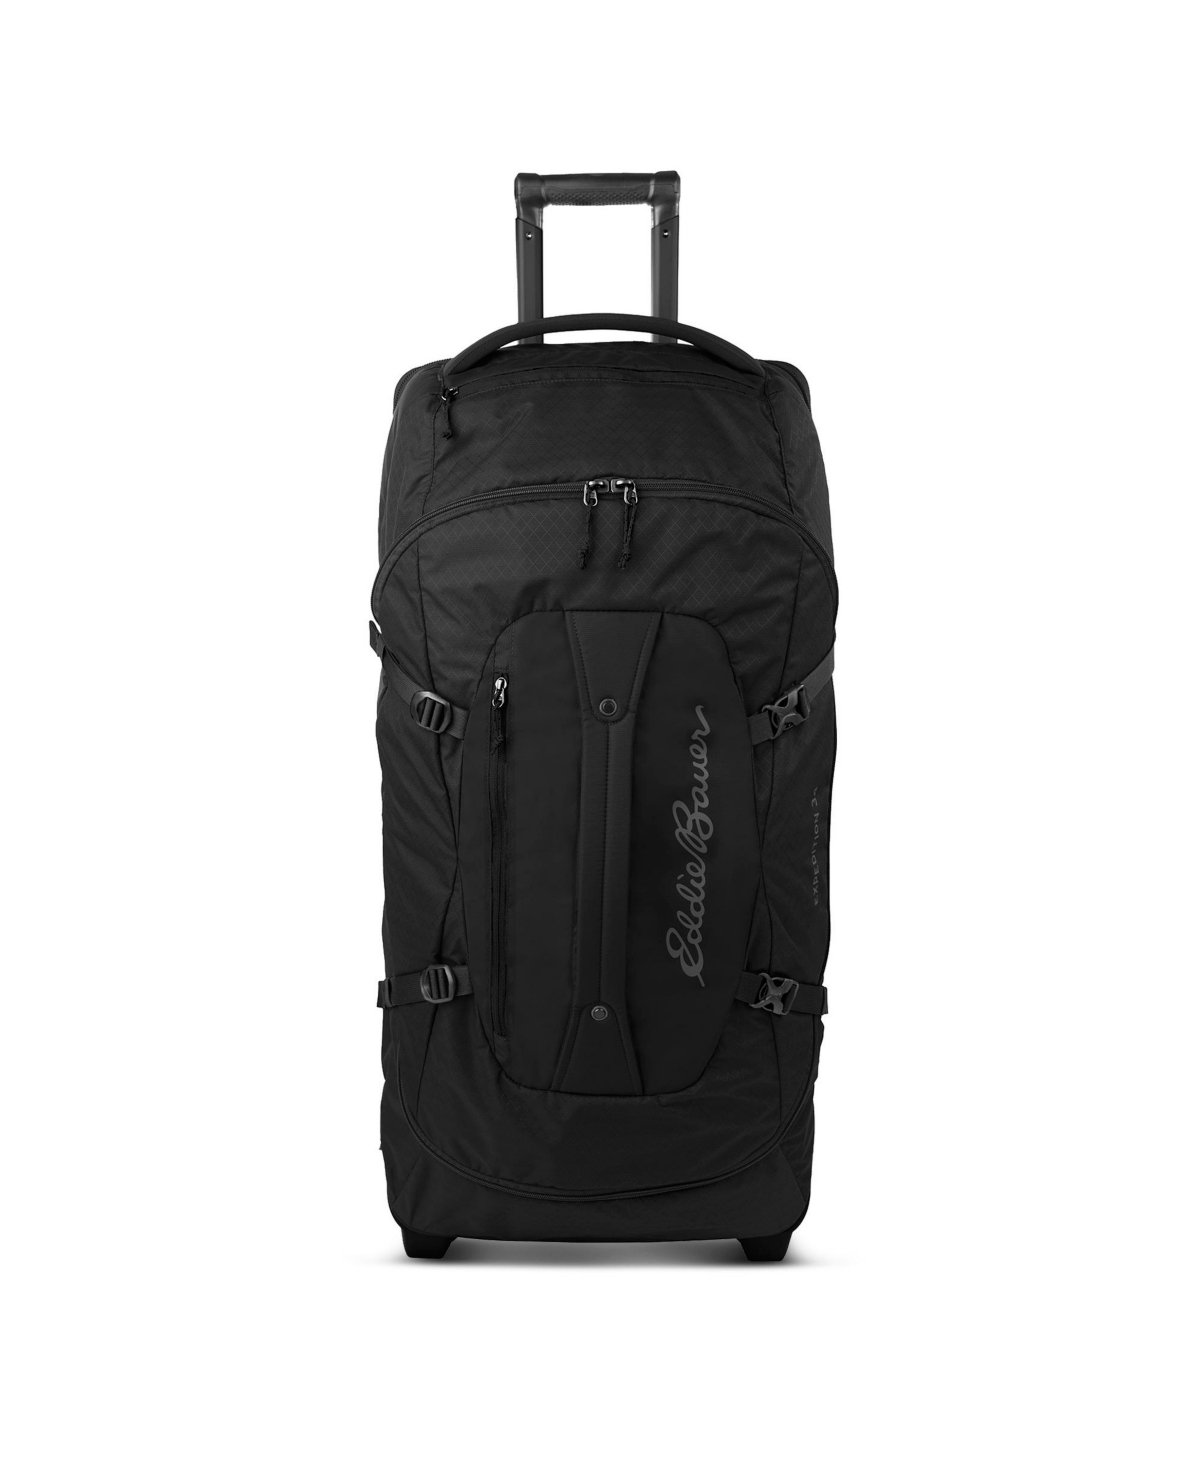 Expedition 34 Duffel 2.0 - Black